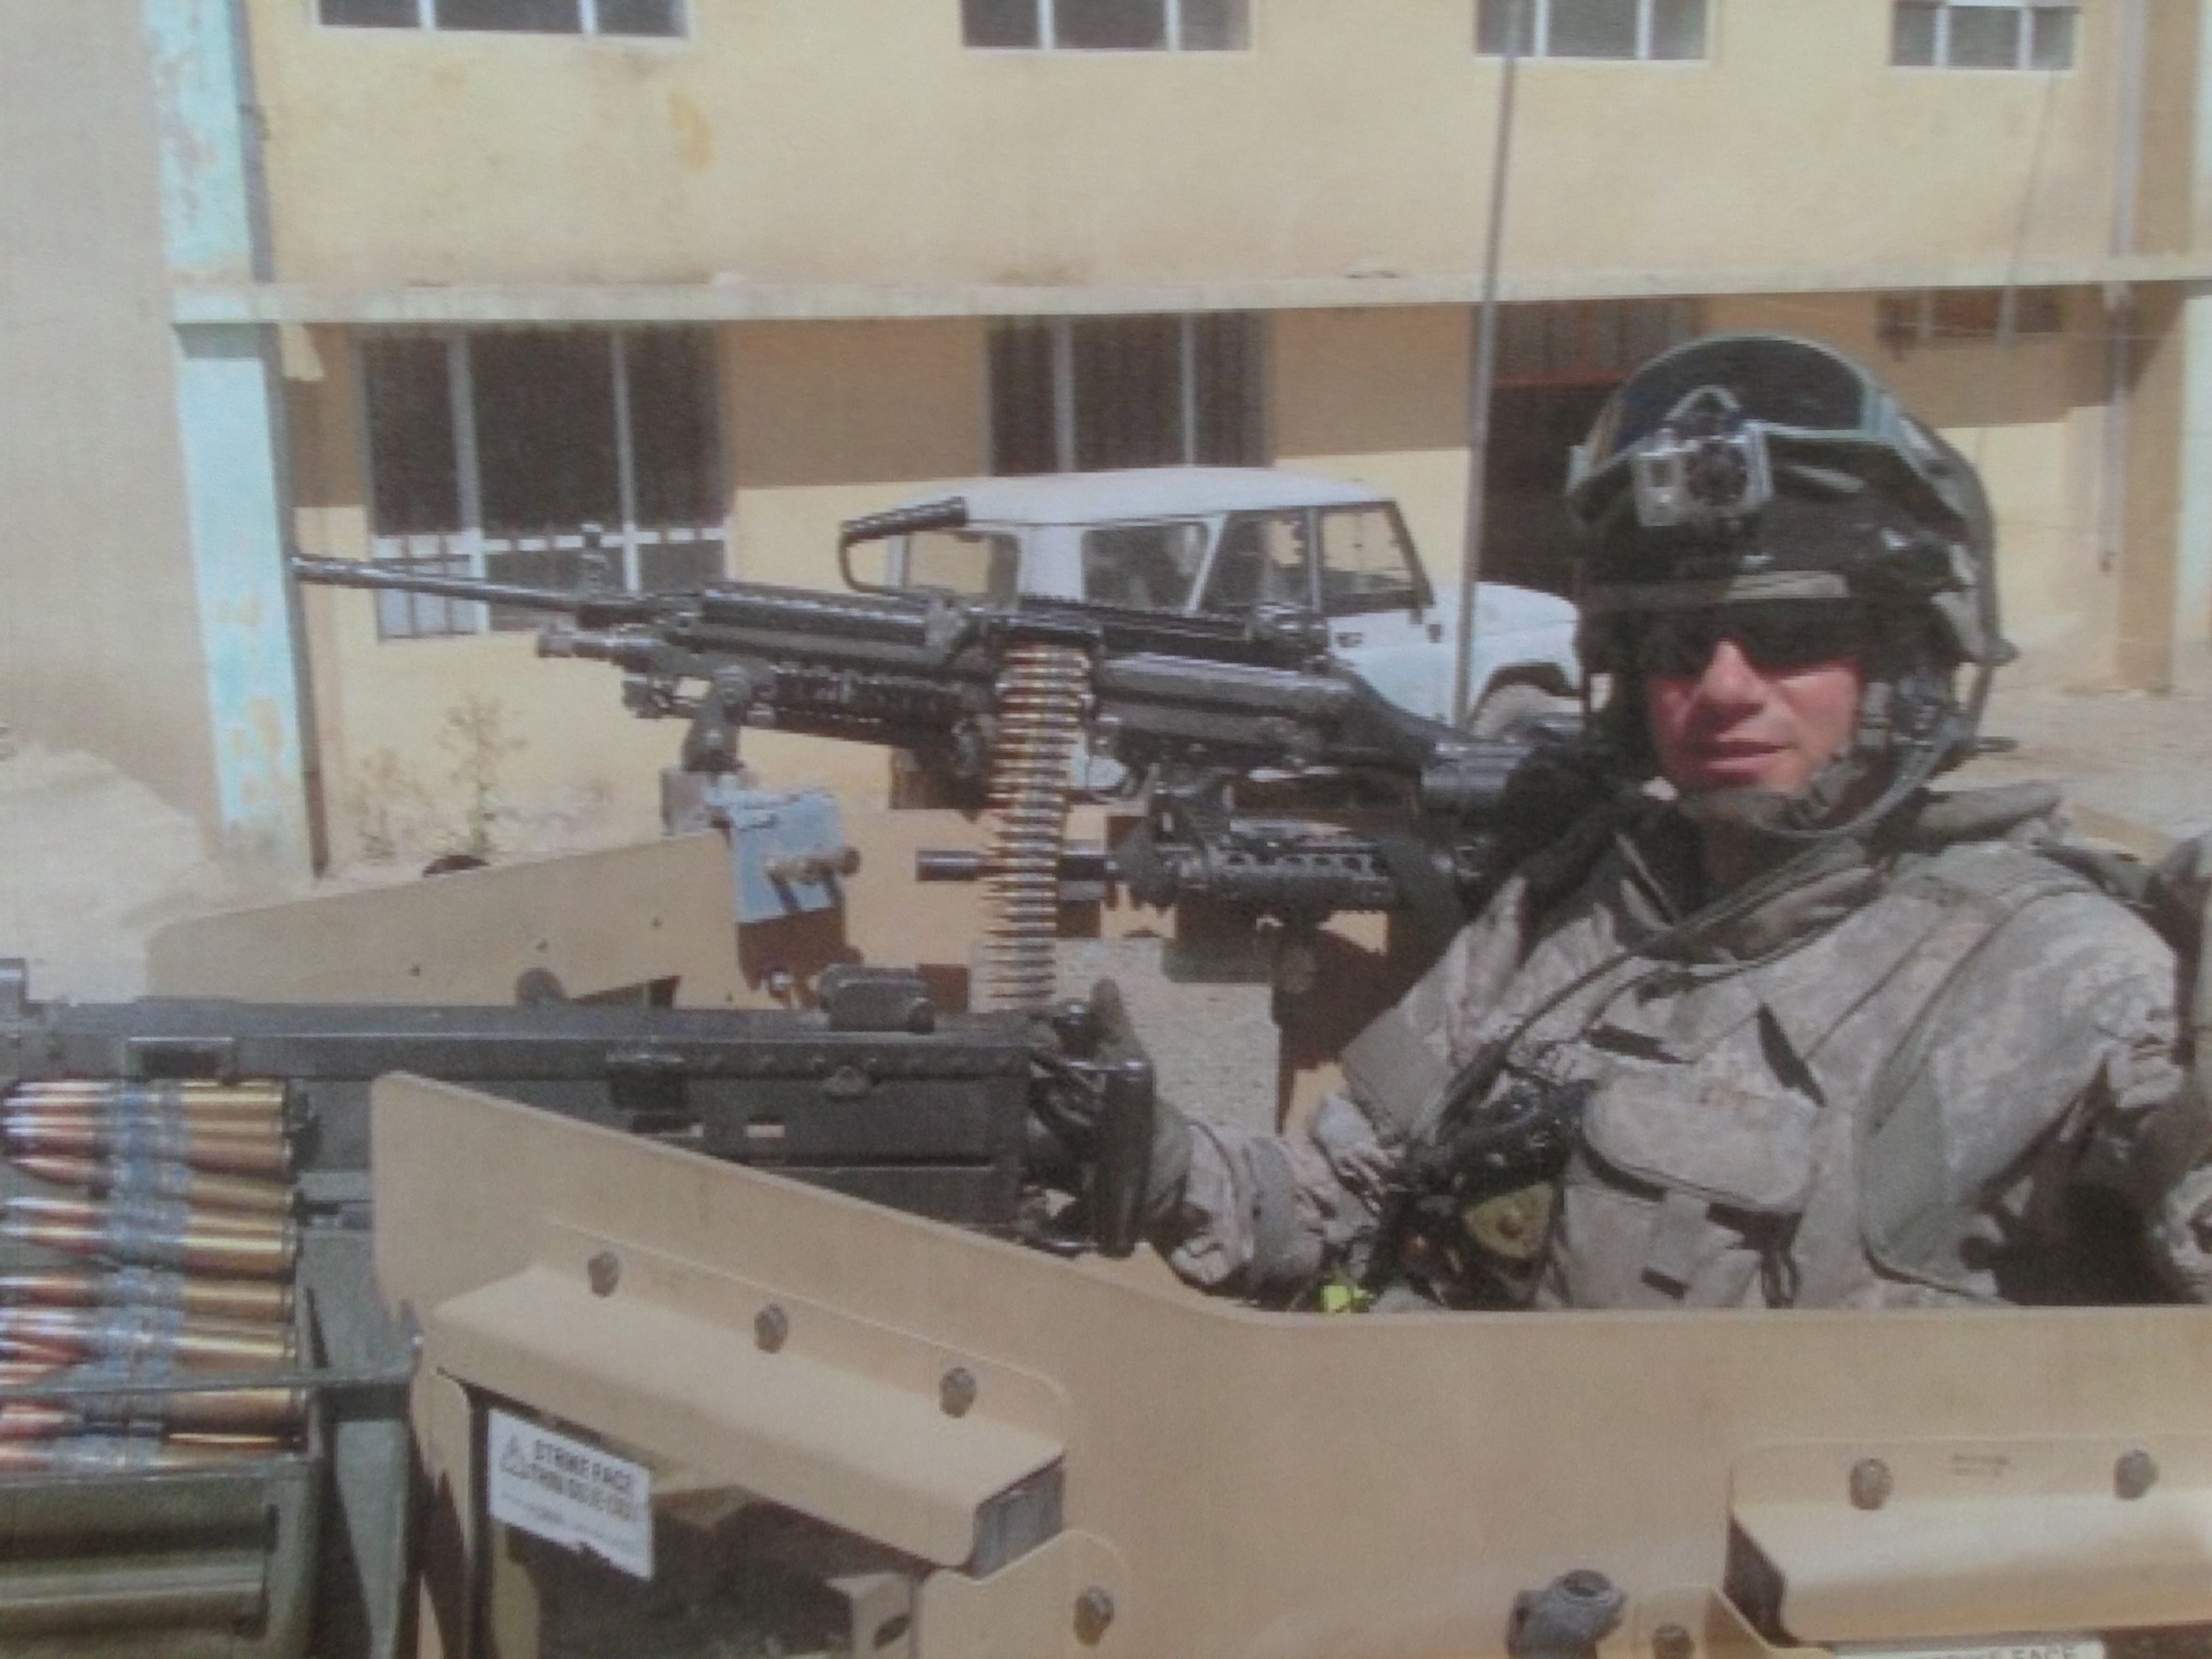 Owner Ron Schnell on duty in Afghanistan